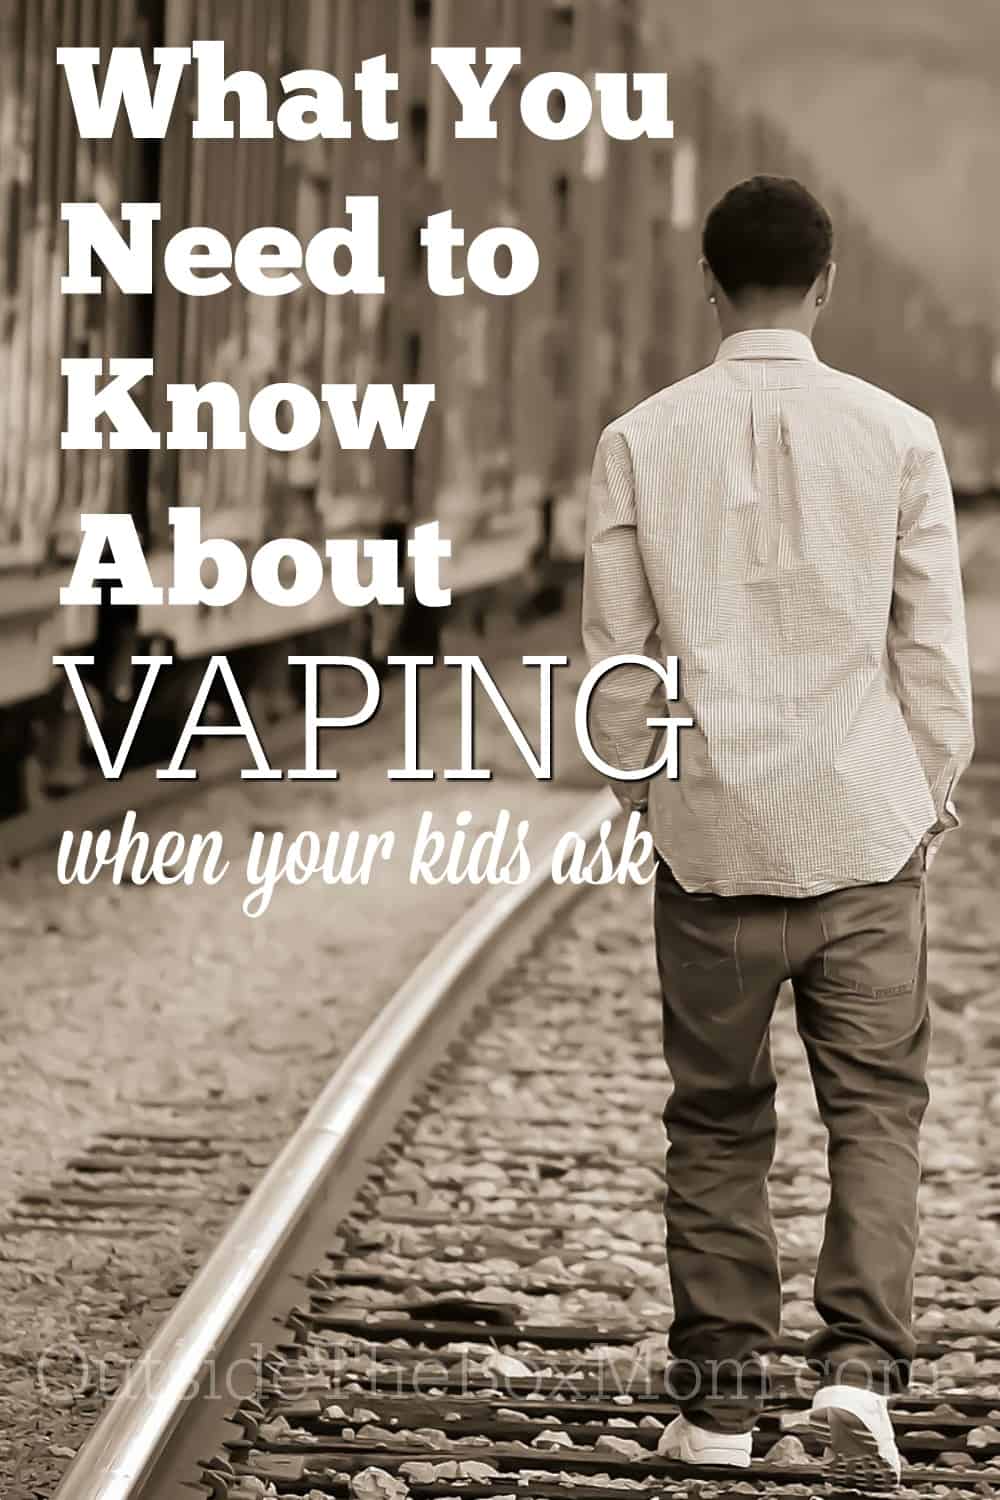 Talking with kids about drugs, alcohol, and tobacco are important topics to me since I have a 13-year-old son. Here are six things you need to know about vaping.